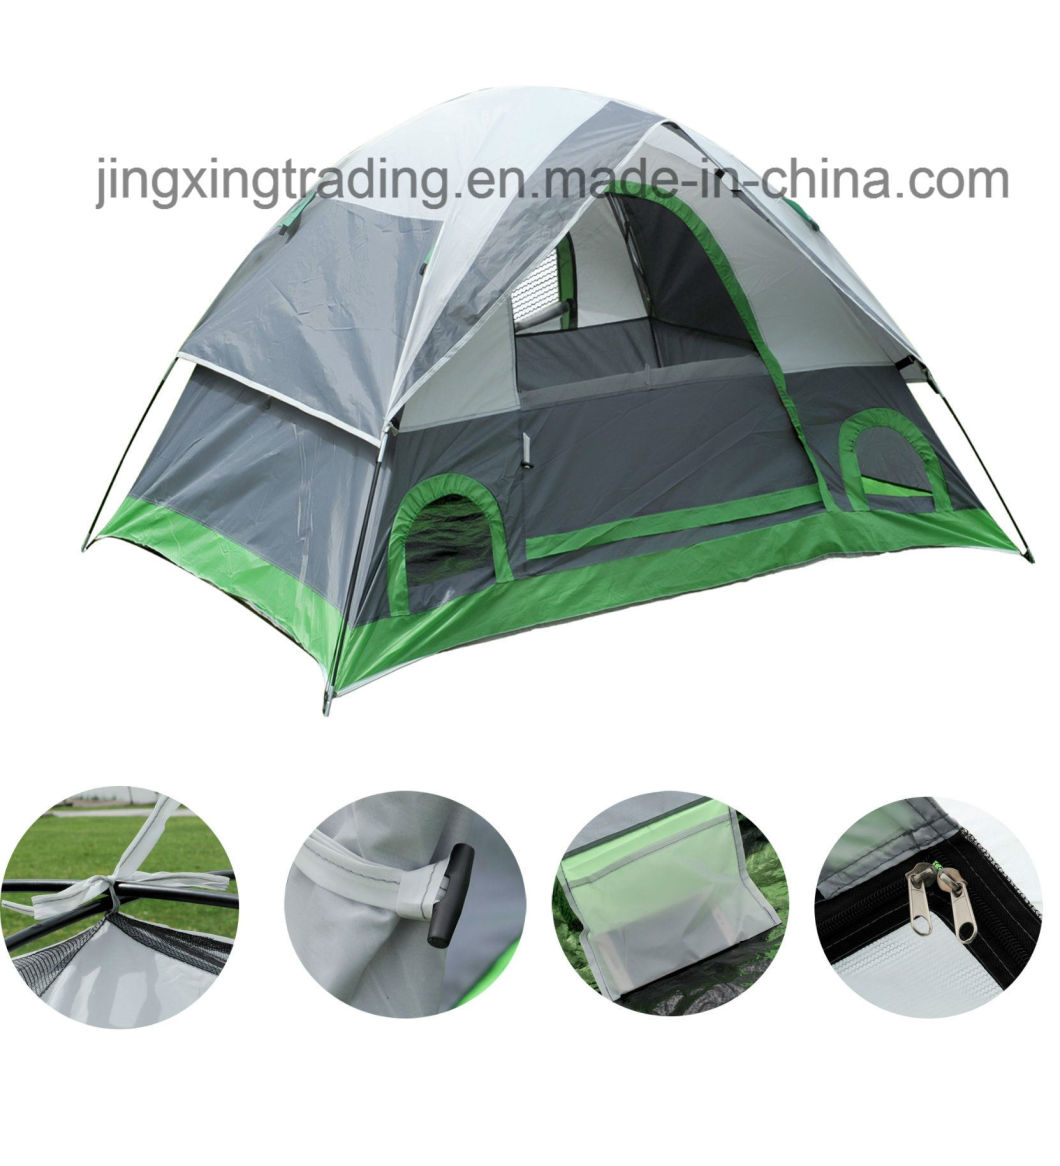 Hot Polyester Outdoor Camping Tent for 2-4 Persons